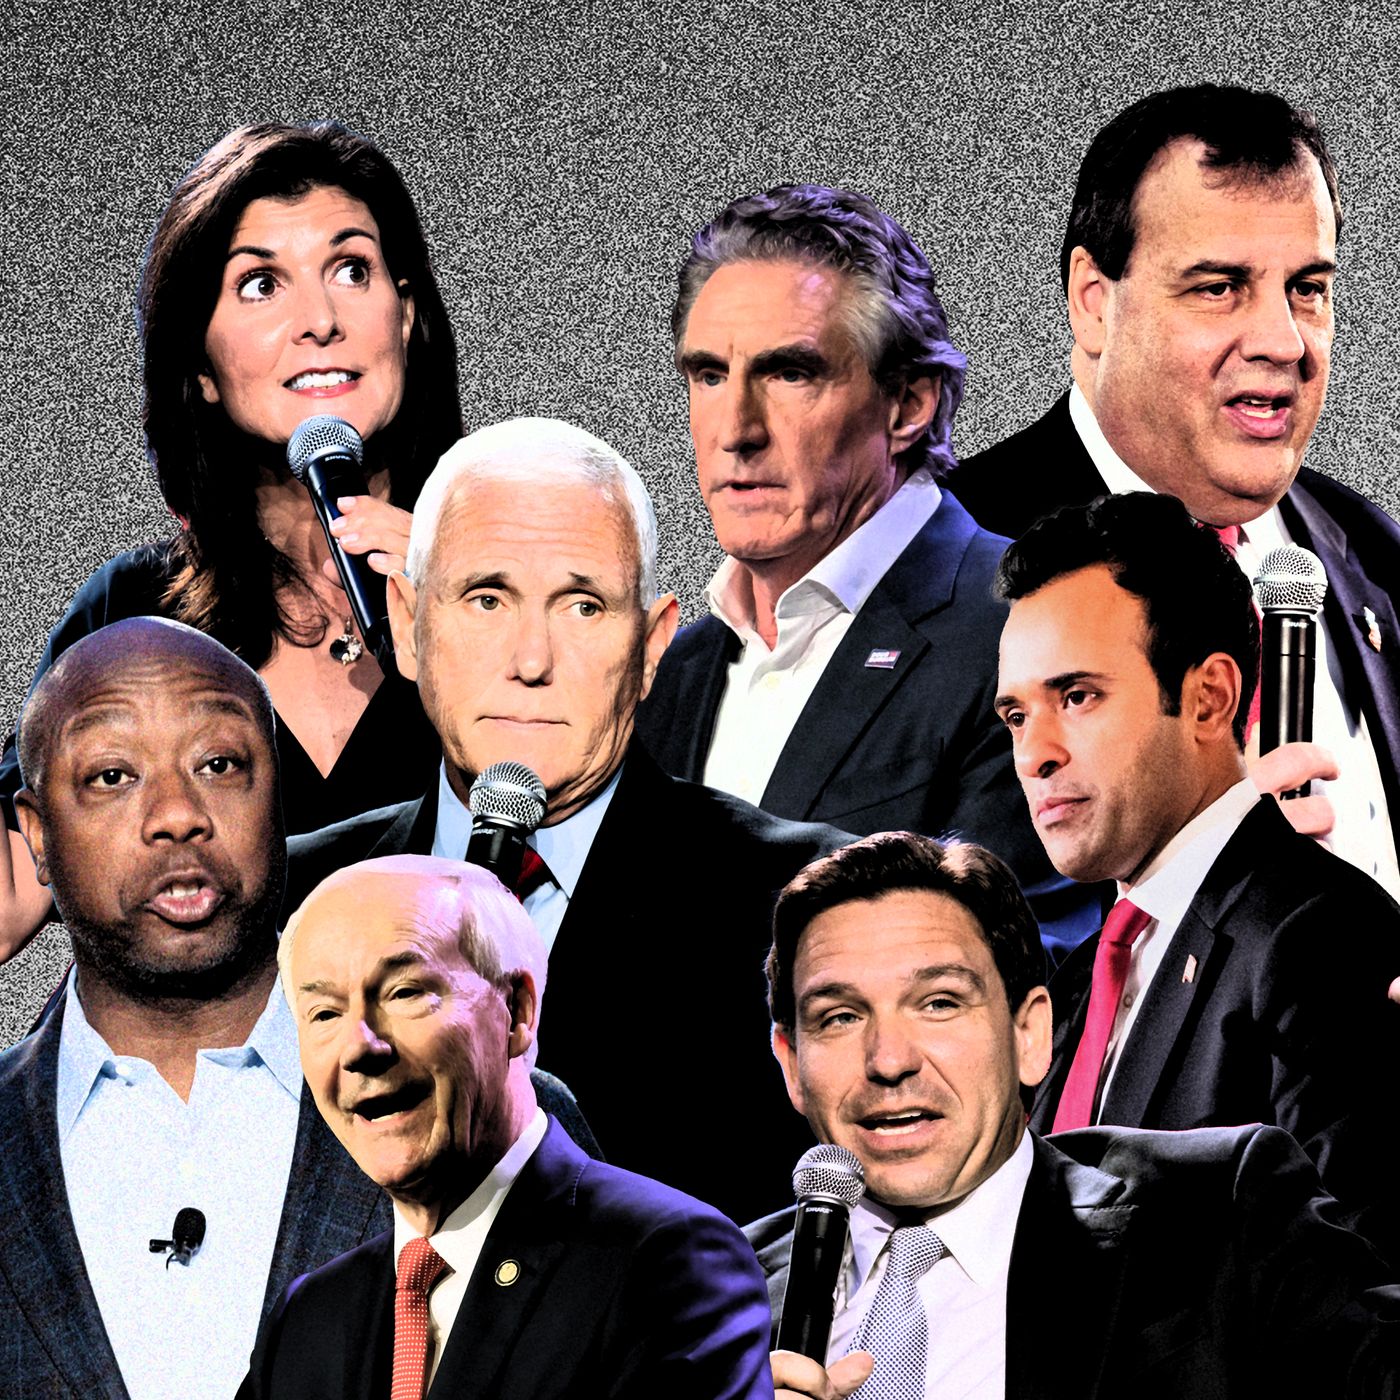 First GOP debate: All the candidates onstage for the first debate,  explained - Vox